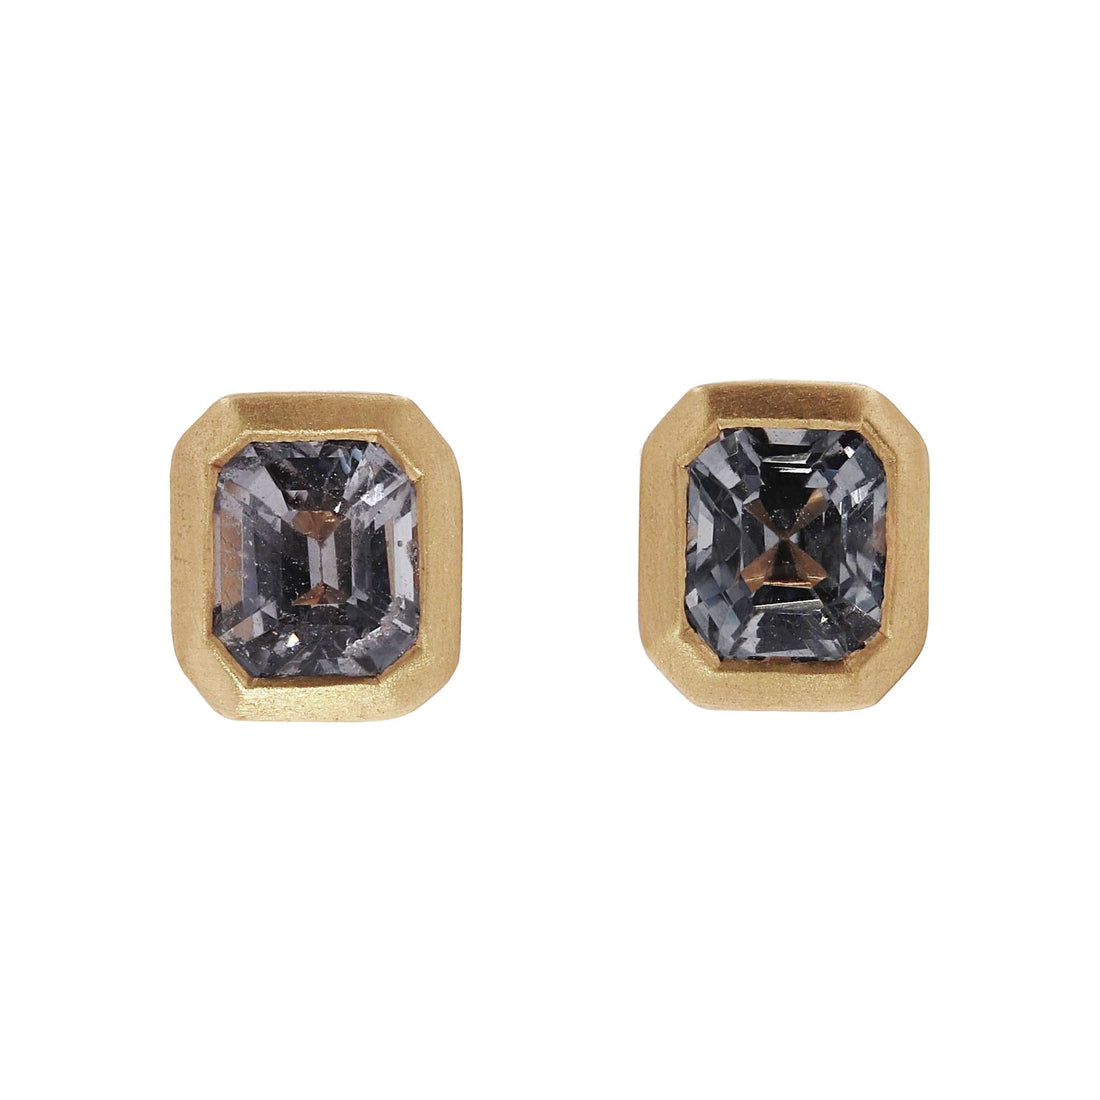 Emerald Cut Bezel Set Gray Spinel Studs by Kimberly Collins - Skeie's Jewelers